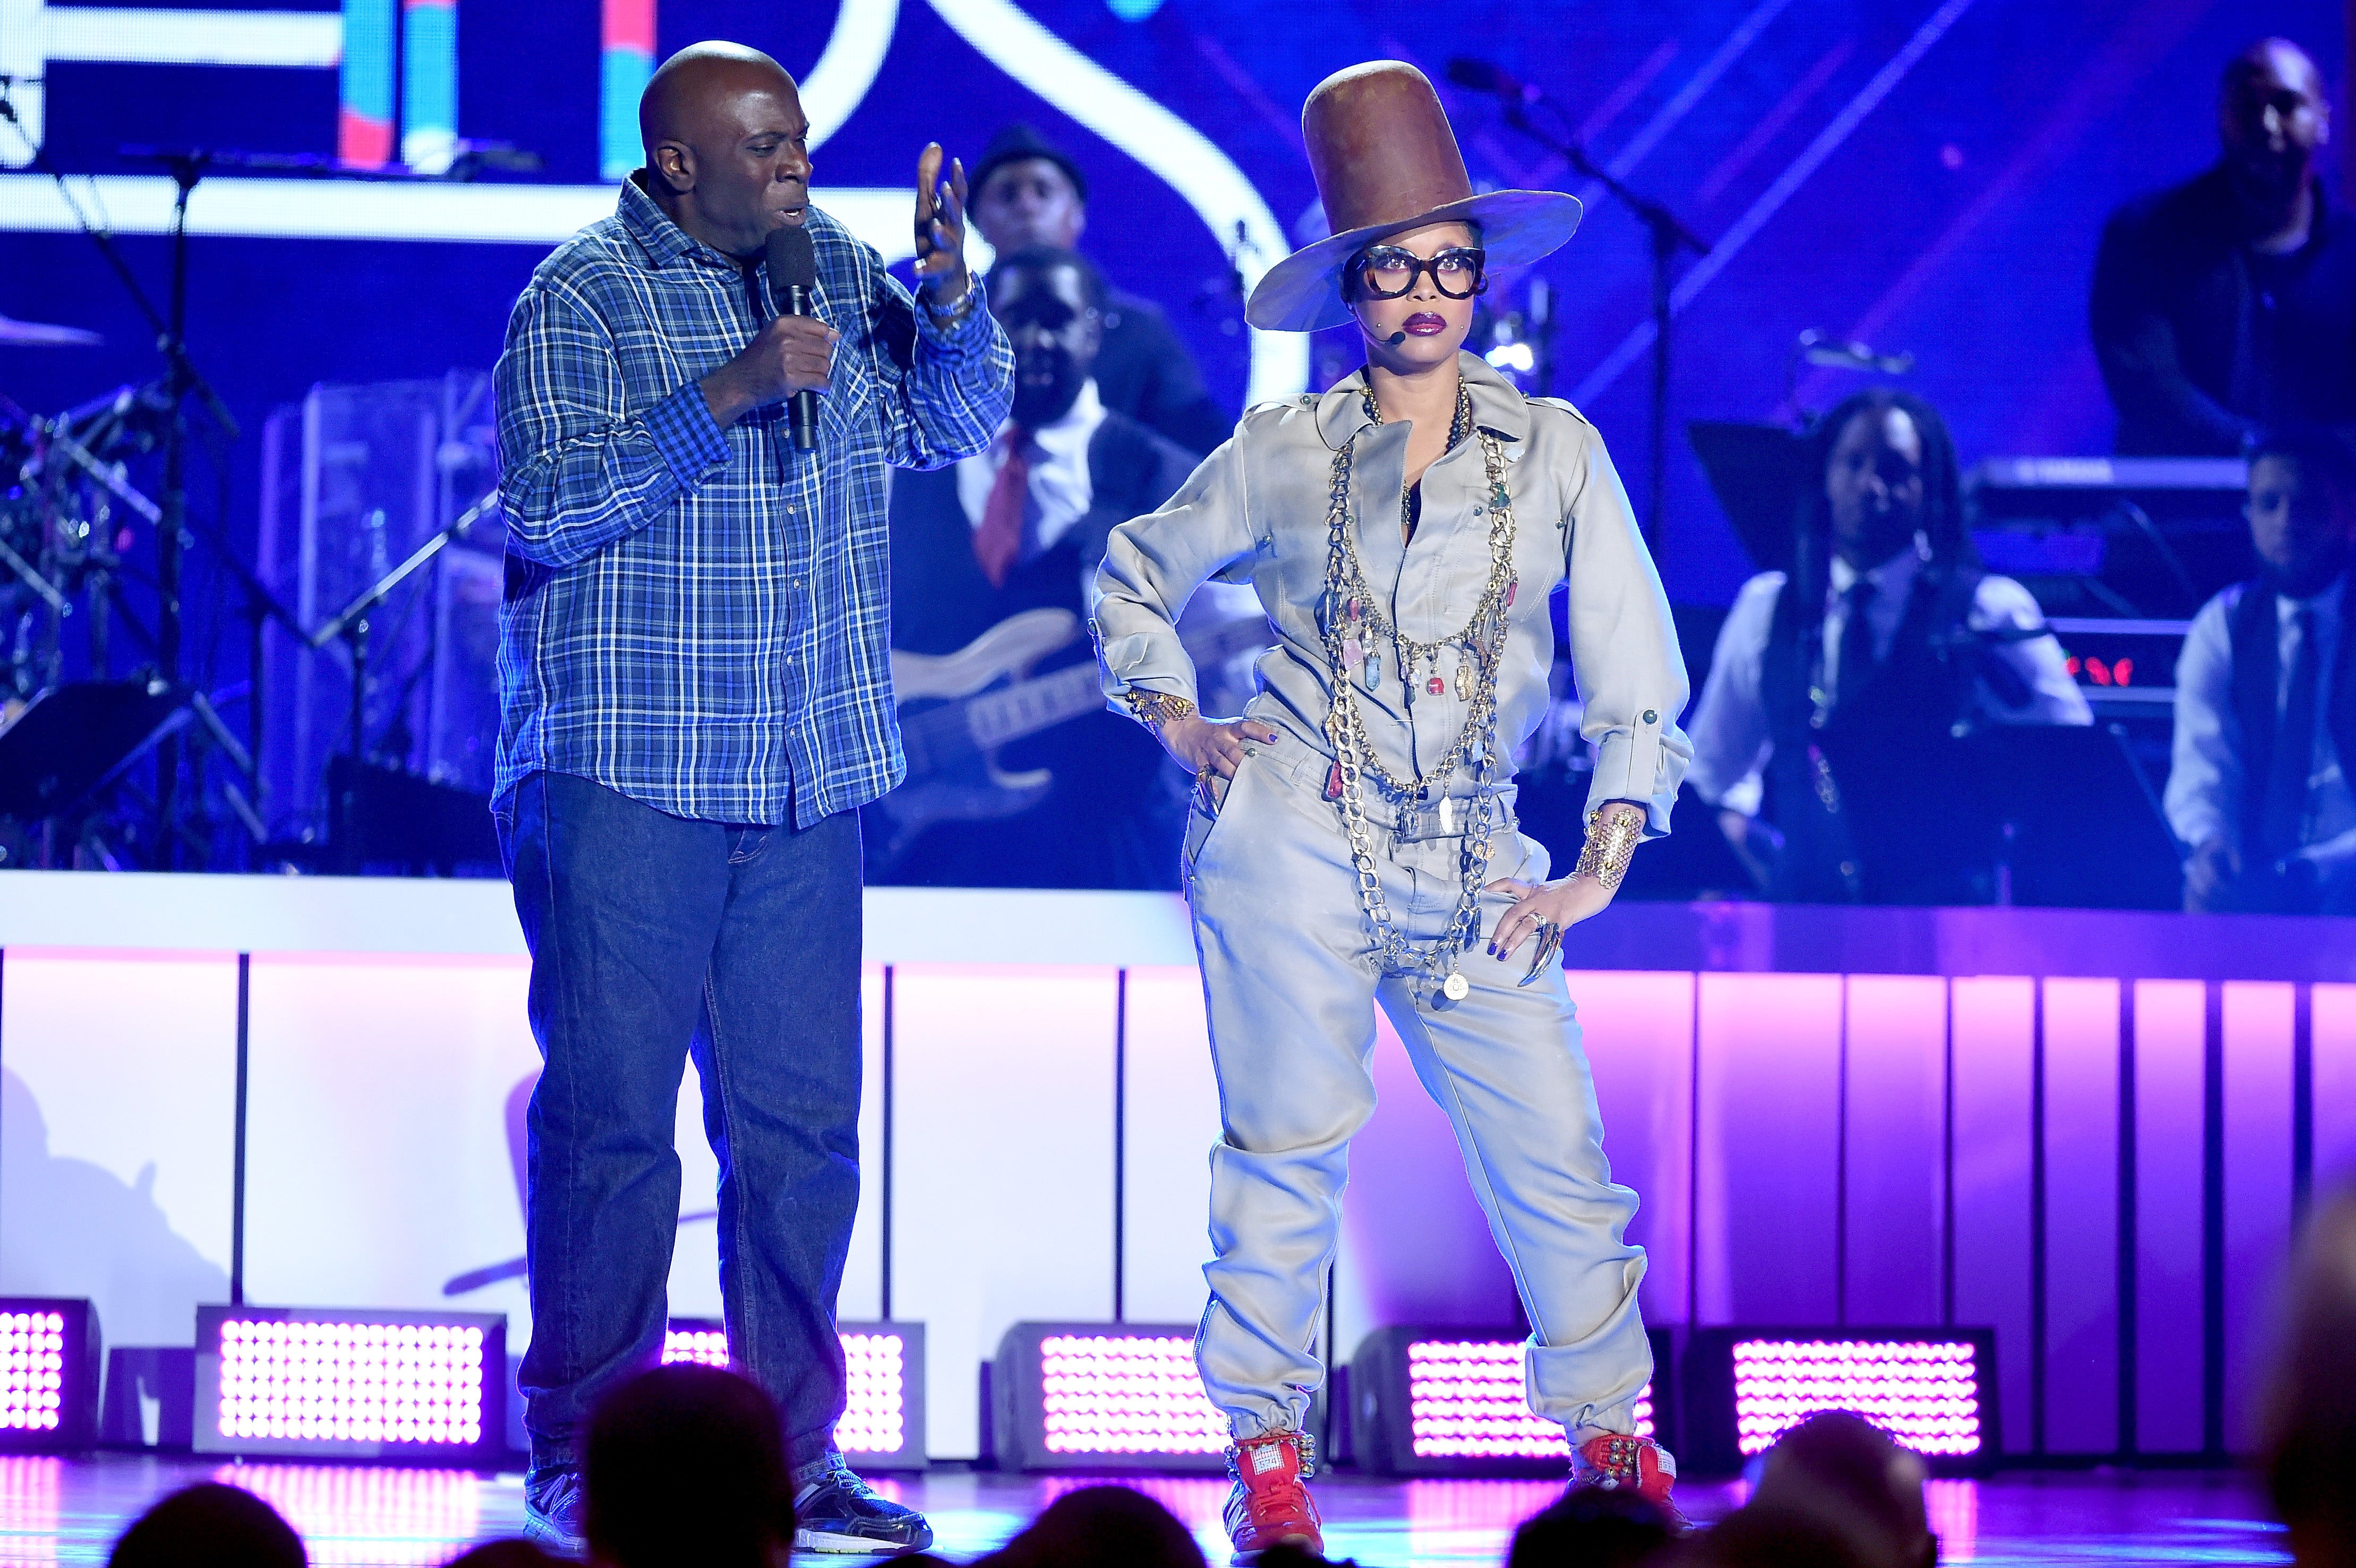 You'll Want to Watch the Soul Train Awards Just to See Erykah Badu's Statement-Making Looks